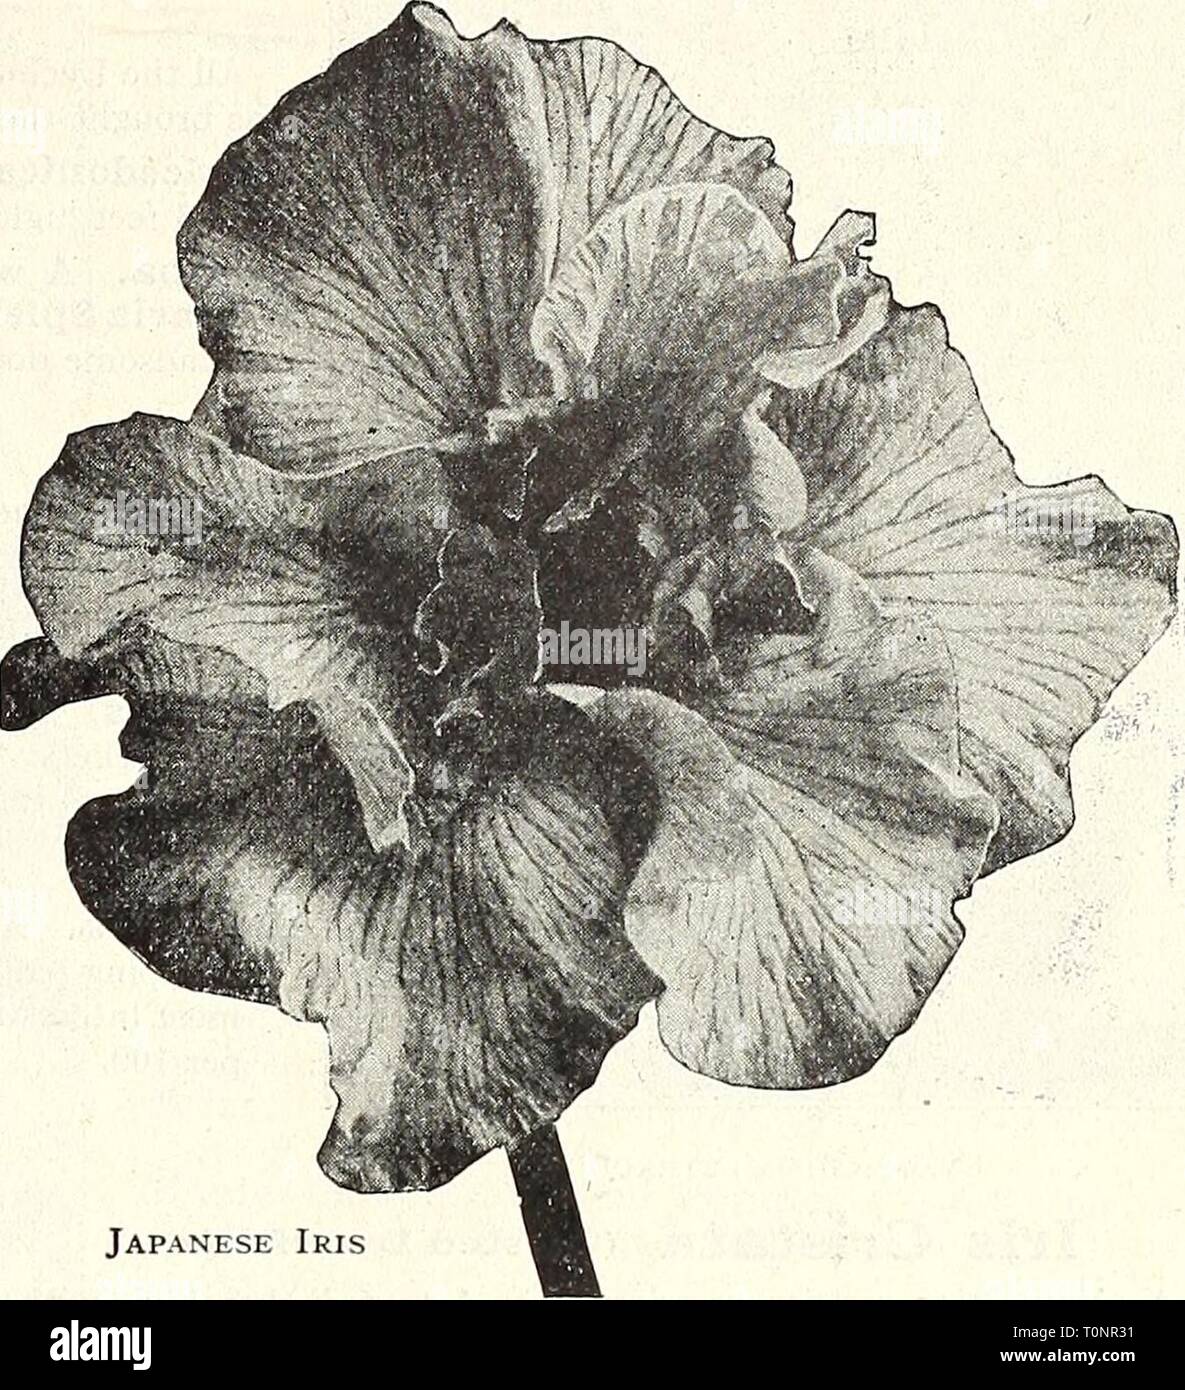 Dreer's autumn catalogue 1931 (1931) Dreer's autumn catalogue 1931  dreersautumncata1931henr Year: 1931  pWjyA-BBEE^ HARDY PERENNIAL PIANTS I 37 Japanese IriS (Iris Kaempferi) The improved forms of this beautiful flower have placed them in the same rank popularly as the Hardy Phloxes and Peonies. Coming into flower about the middle of June, and continuing for 3 to 4 weeks they fill in a period when flowers of this attractive type are particularly welcome. They succeed in almost any soil and position, but like rich soil and plenty of water when they are forming their buds and develop- ing their Stock Photo